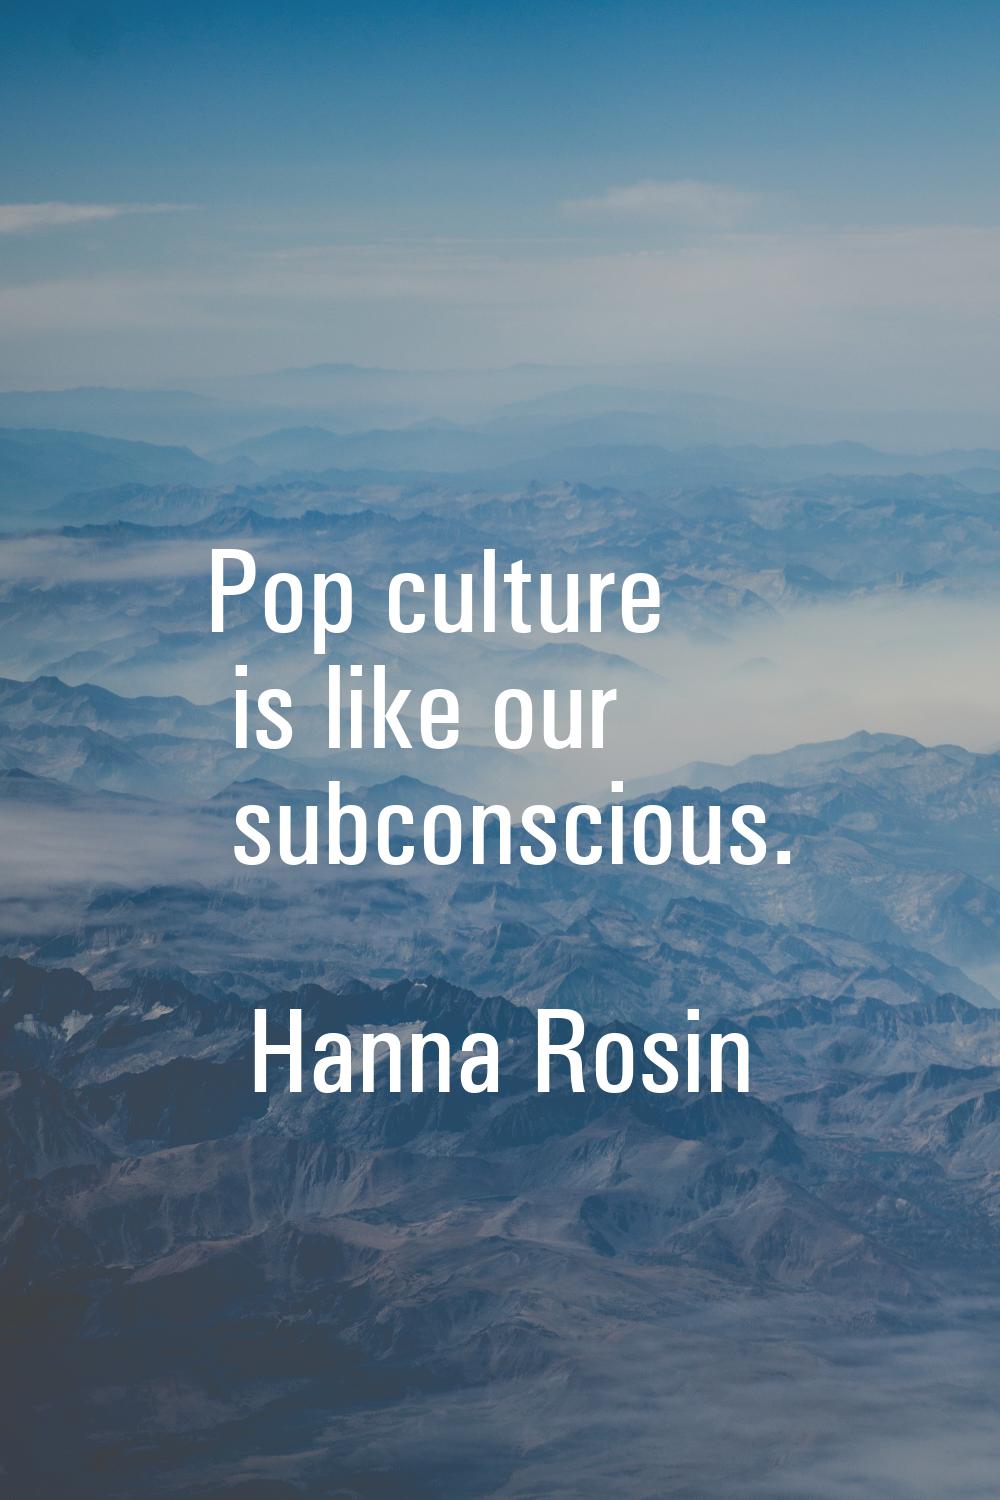 Pop culture is like our subconscious.